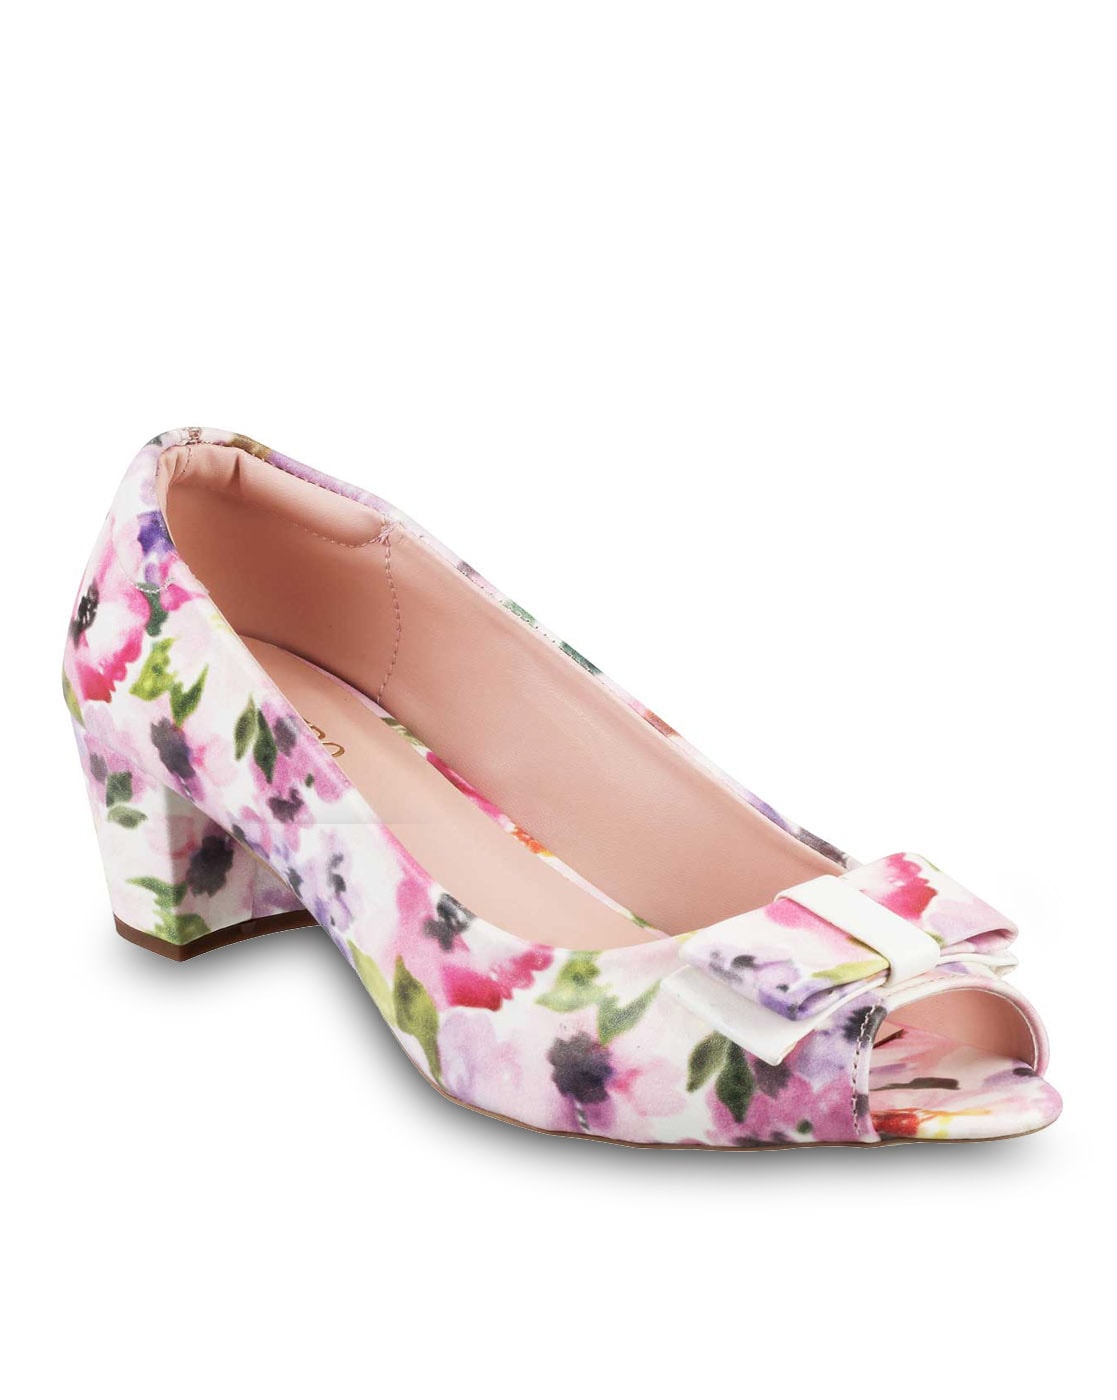 Watercolor Shoes 5 inch Heels Pumps Closed Toe Heels for Work | Up2Step